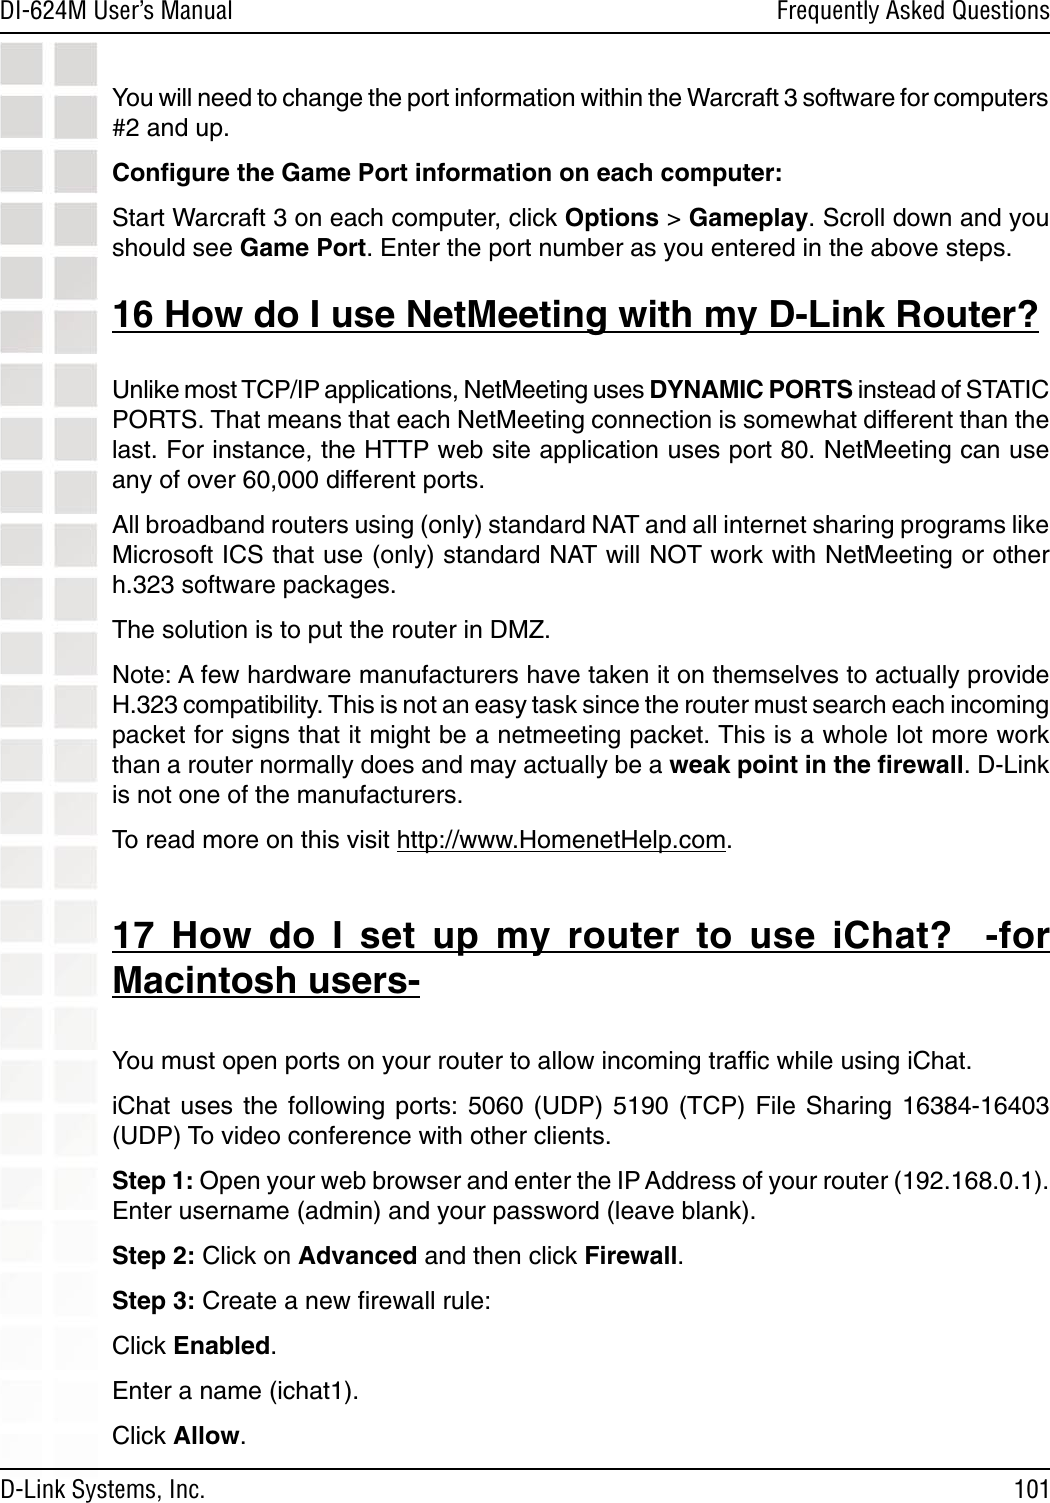 101DI-624M User’s Manual D-Link Systems, Inc.Frequently Asked QuestionsYou will need to change the port information within the Warcraft 3 software for computers #2 and up.Conﬁgure the Game Port information on each computer: Start Warcraft 3 on each computer, click Options &gt; Gameplay. Scroll down and you should see Game Port. Enter the port number as you entered in the above steps. 16 How do I use NetMeeting with my D-Link Router?Unlike most TCP/IP applications, NetMeeting uses DYNAMIC PORTS instead of STATIC PORTS. That means that each NetMeeting connection is somewhat different than the last. For instance, the HTTP web site application uses port 80. NetMeeting can use any of over 60,000 different ports. All broadband routers using (only) standard NAT and all internet sharing programs like Microsoft ICS that use (only) standard NAT will NOT work with NetMeeting or other h.323 software packages. The solution is to put the router in DMZ. Note: A few hardware manufacturers have taken it on themselves to actually provide H.323 compatibility. This is not an easy task since the router must search each incoming packet for signs that it might be a netmeeting packet. This is a whole lot more work than a router normally does and may actually be a weak point in the ﬁrewall. D-Link is not one of the manufacturers.To read more on this visit http://www.HomenetHelp.com.17  How  do  I  set  up  my  router  to  use  iChat?    -for Macintosh users-You must open ports on your router to allow incoming trafﬁc while using iChat. iChat  uses  the  following  ports:  5060  (UDP)  5190  (TCP)  File  Sharing  16384-16403 (UDP) To video conference with other clients. Step 1: Open your web browser and enter the IP Address of your router (192.168.0.1). Enter username (admin) and your password (leave blank). Step 2: Click on Advanced and then click Firewall. Step 3: Create a new ﬁrewall rule: Click Enabled. Enter a name (ichat1). Click Allow. 